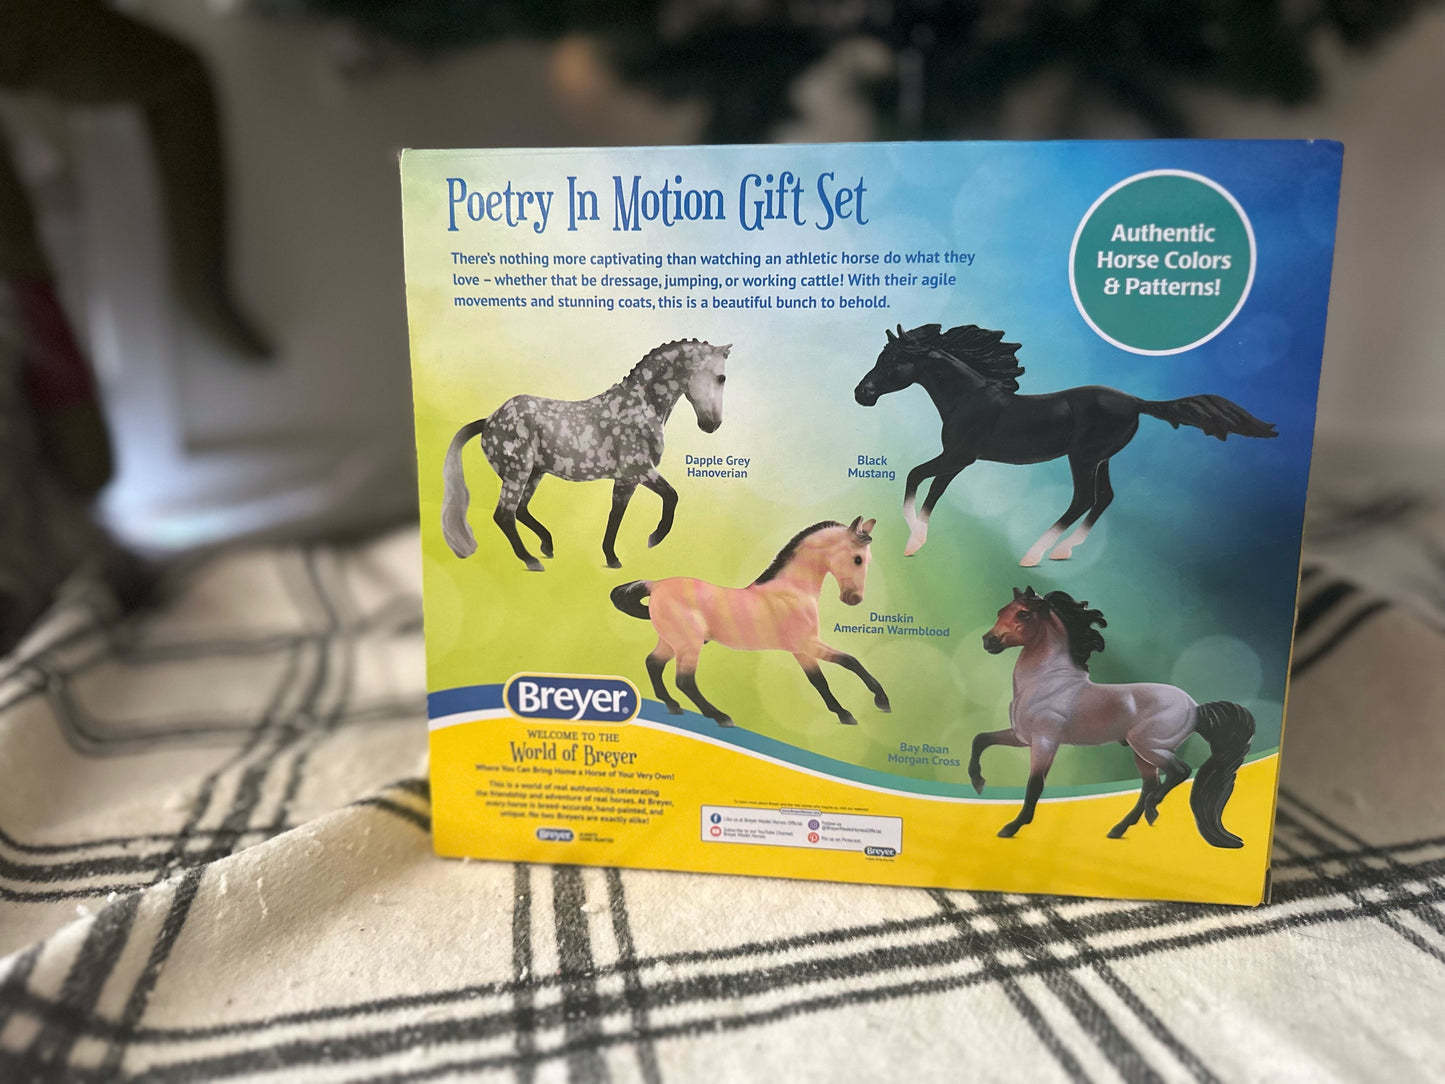 Breyer Poetry in Motion Stablemates Giftset